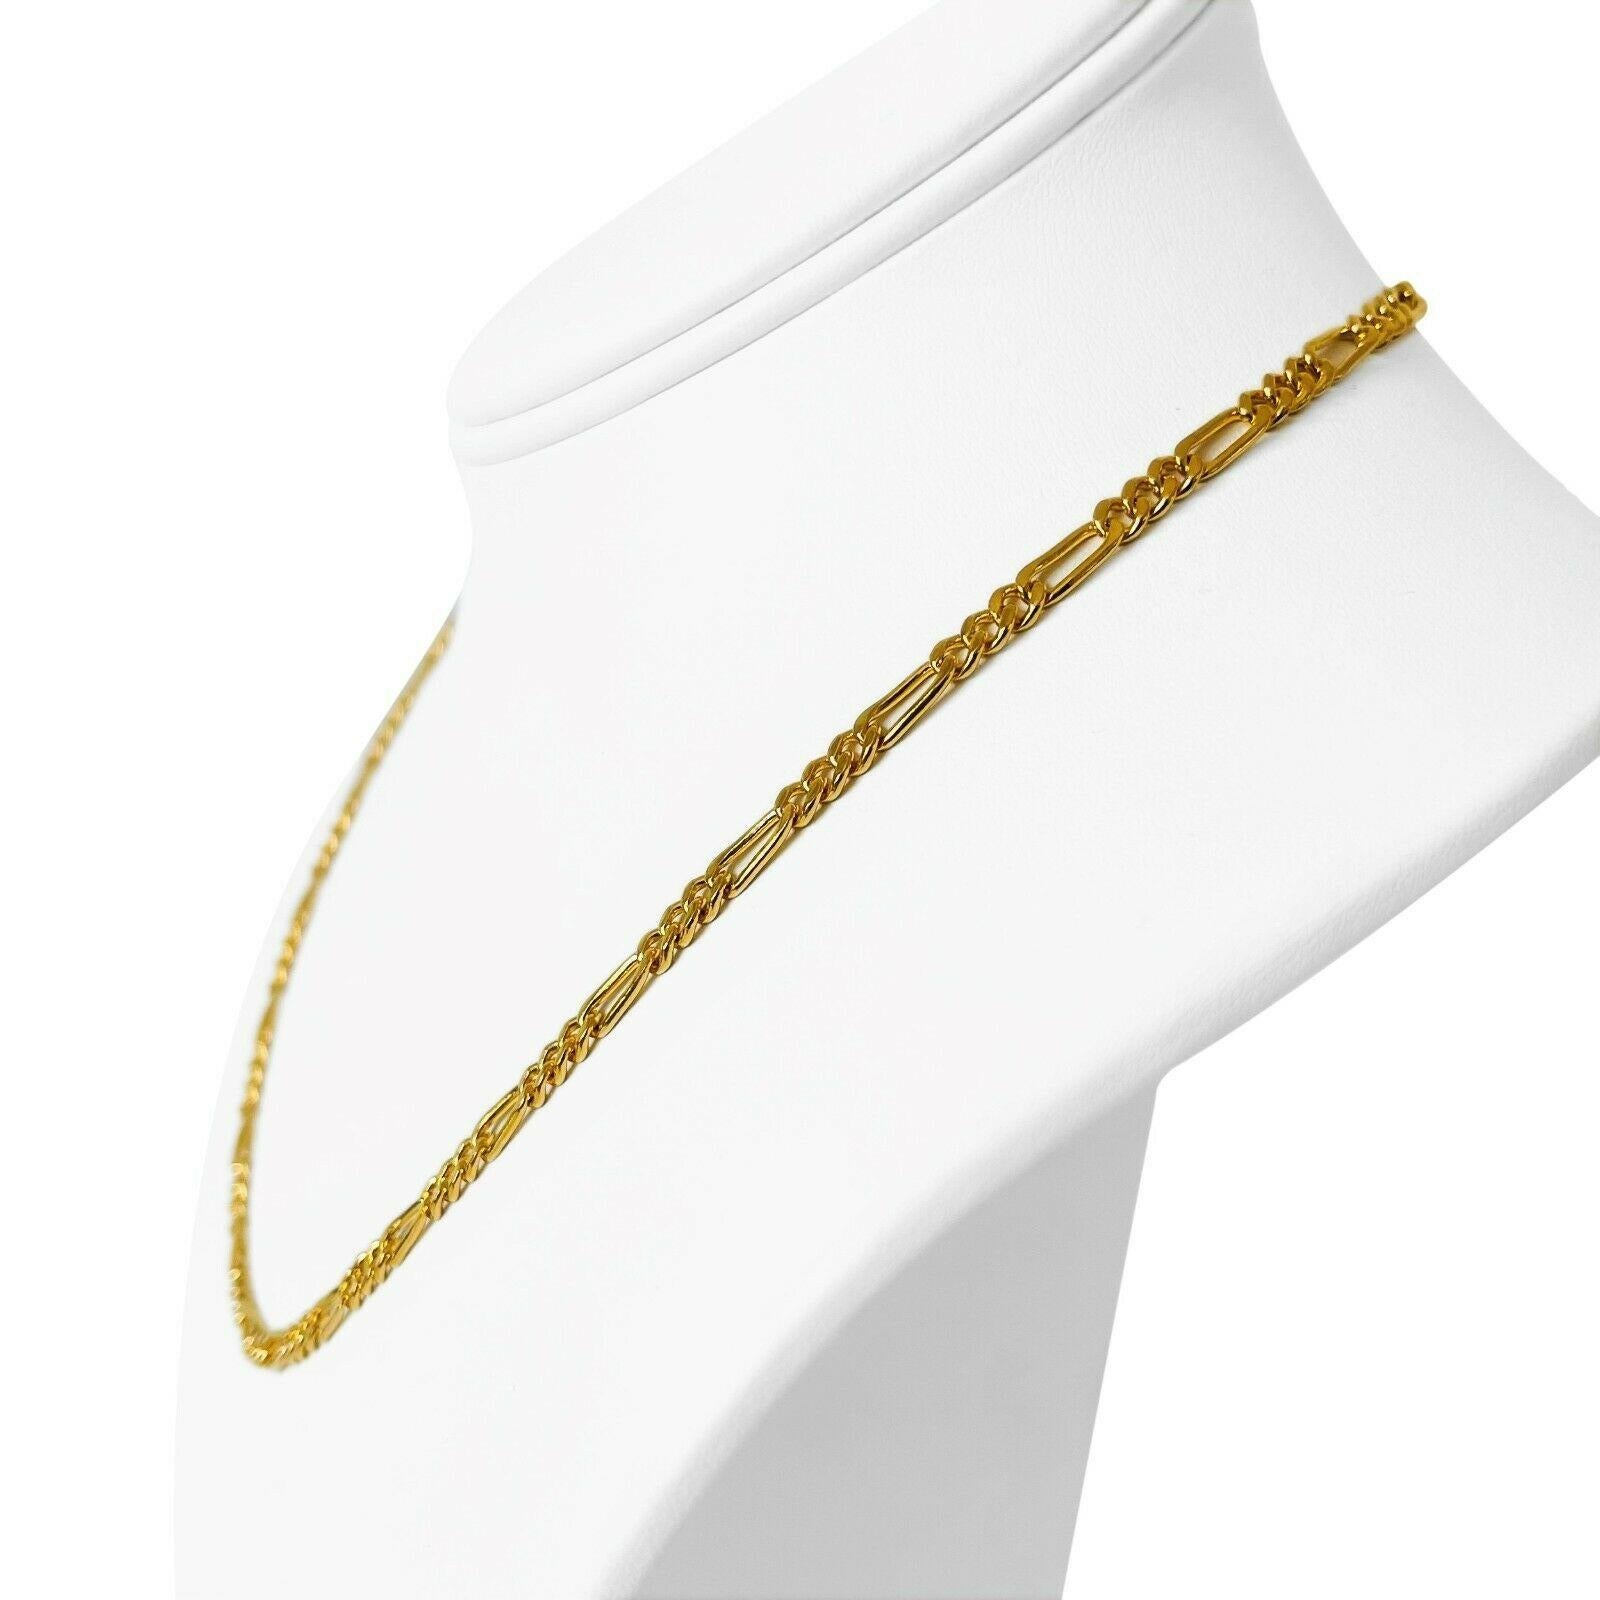 24k Pure Yellow Gold 21.9g Ladies 4mm Figaro Link Chain Necklace 18